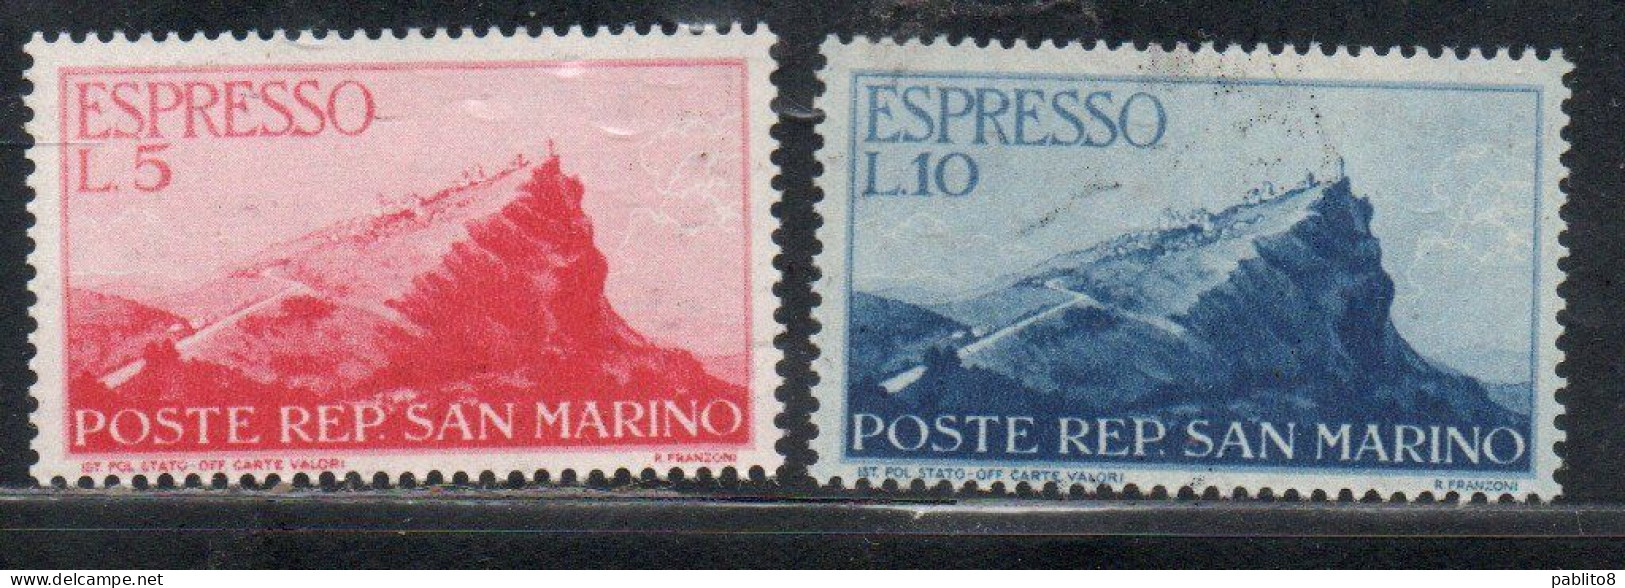 SAN MARINO 1945 1946 ESPRESSI VEDUTA SPECIAL DELIVERY VIEW SERIE COMPLETA COMPLETE SET MNH - Express Letter Stamps